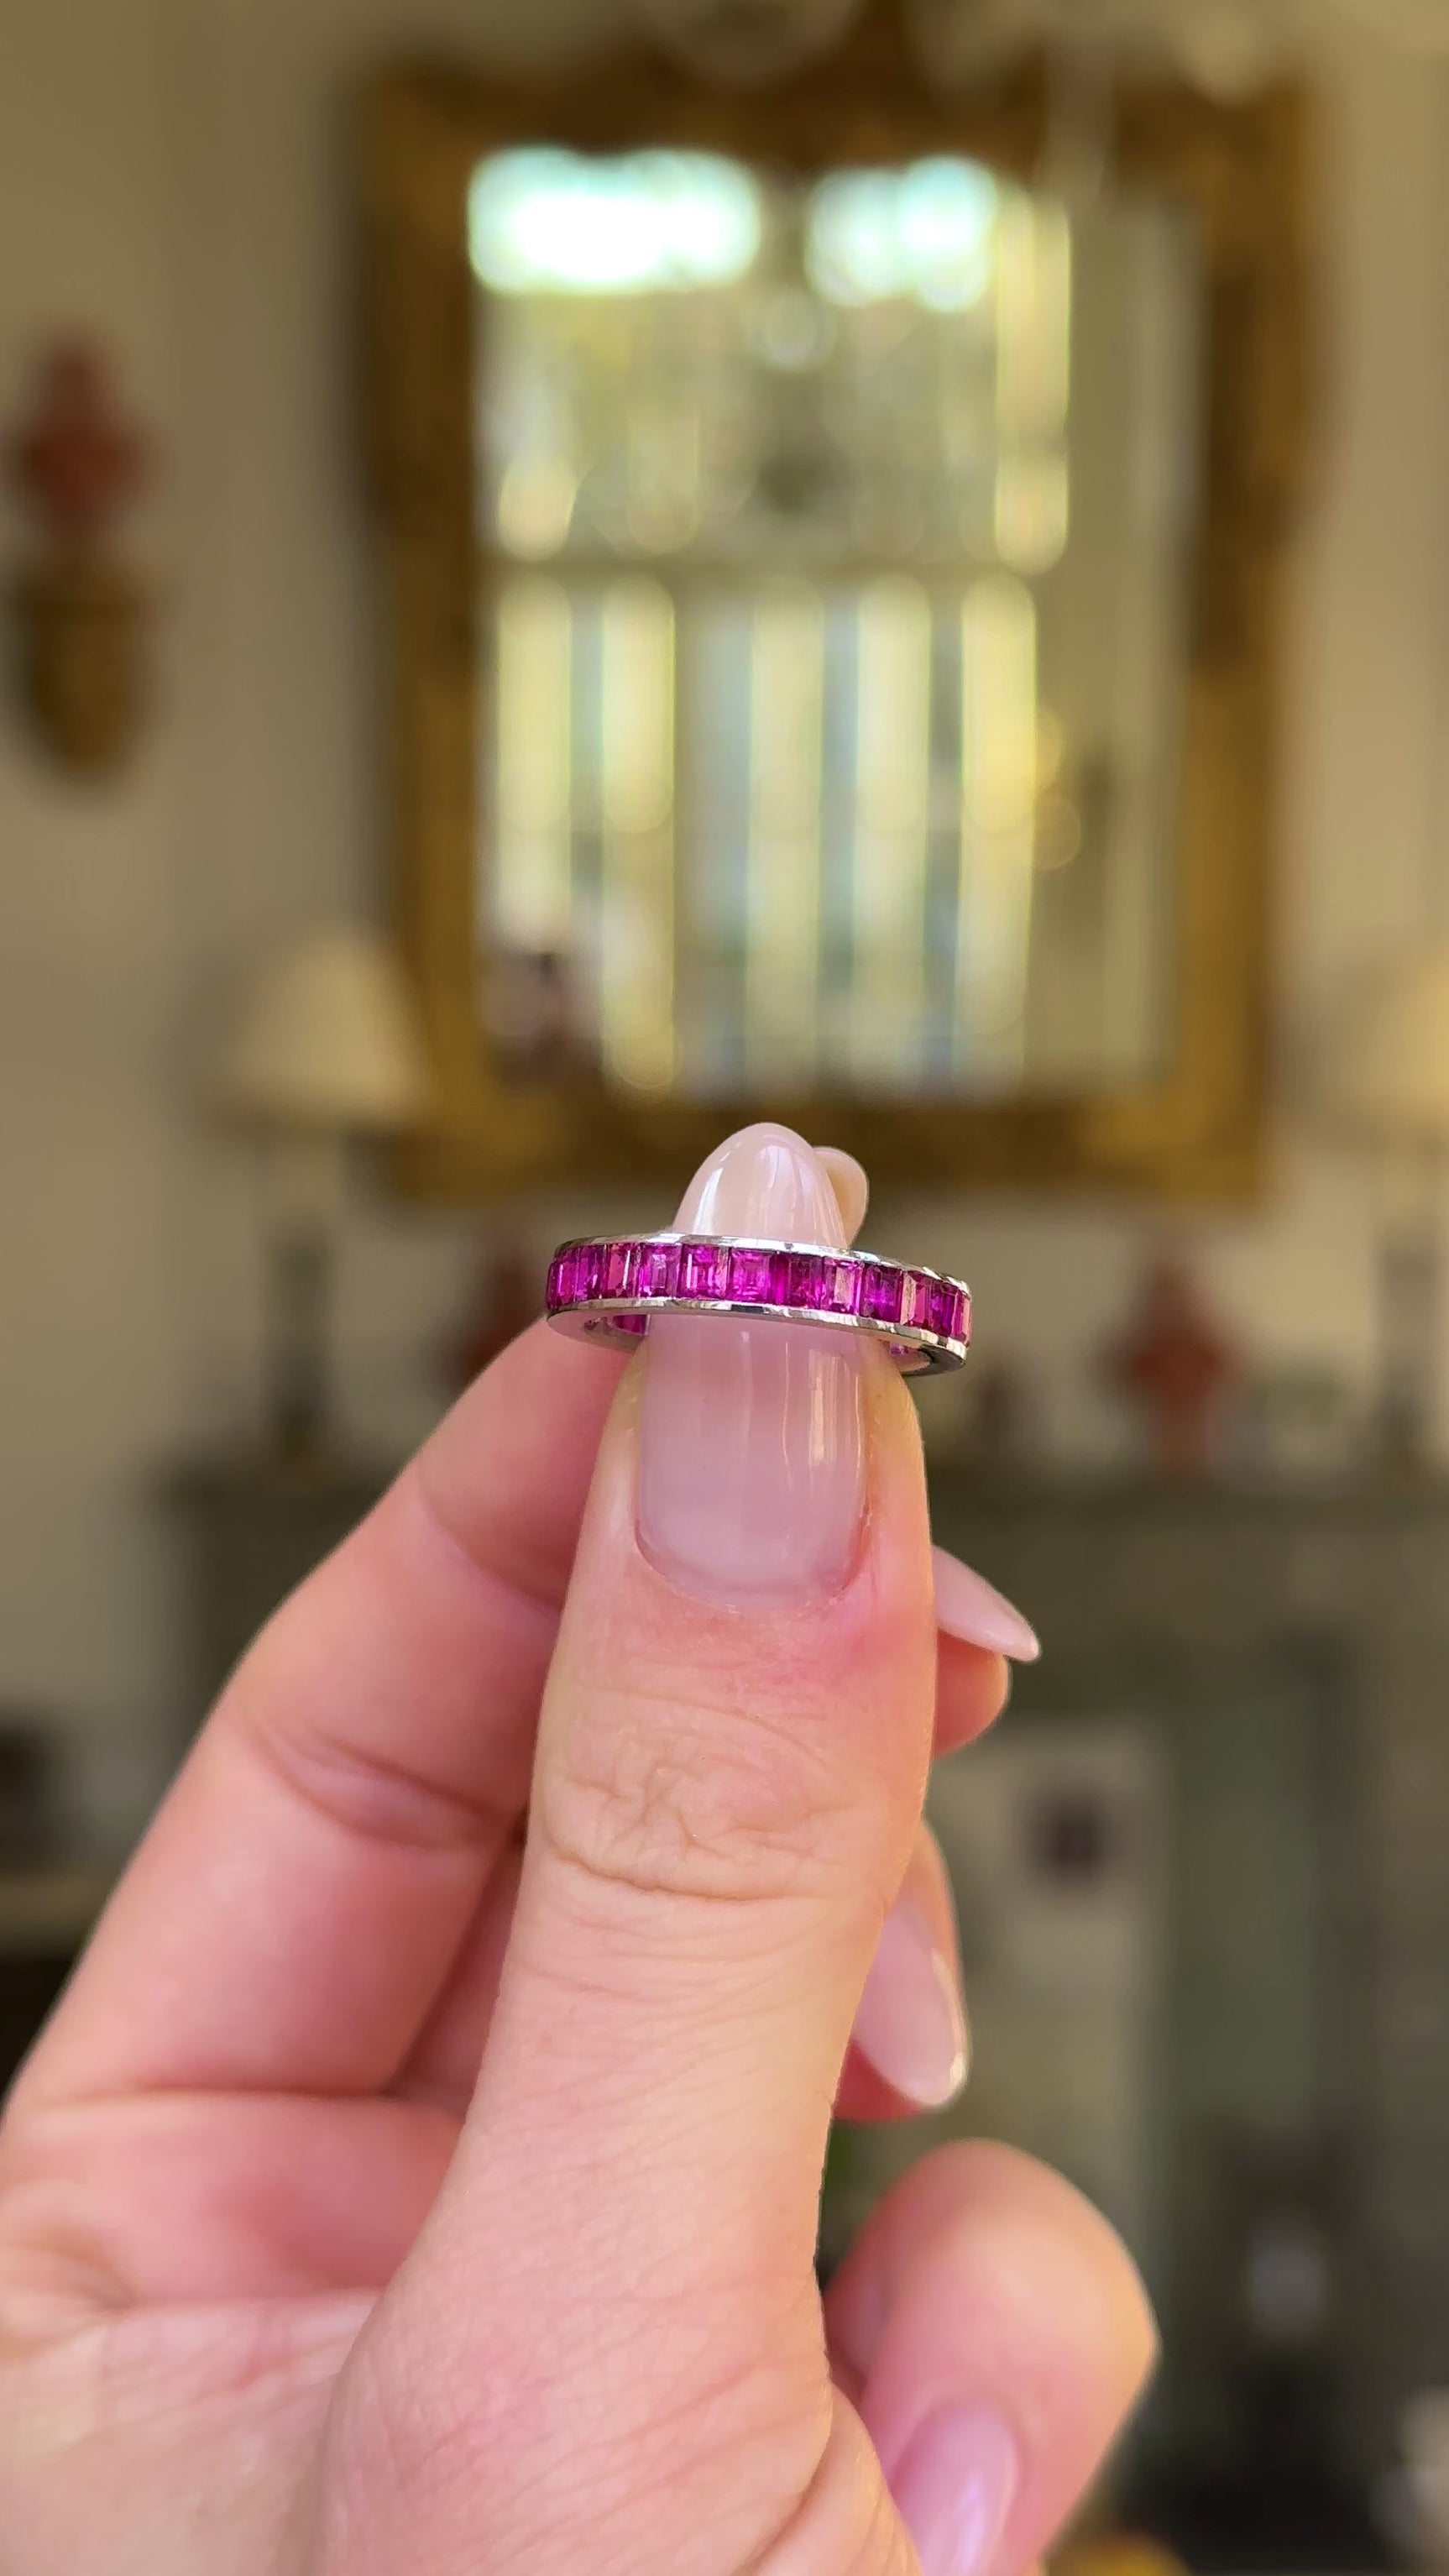 Vintage ruby eternity ring held in fingers and moved around to give perspective.